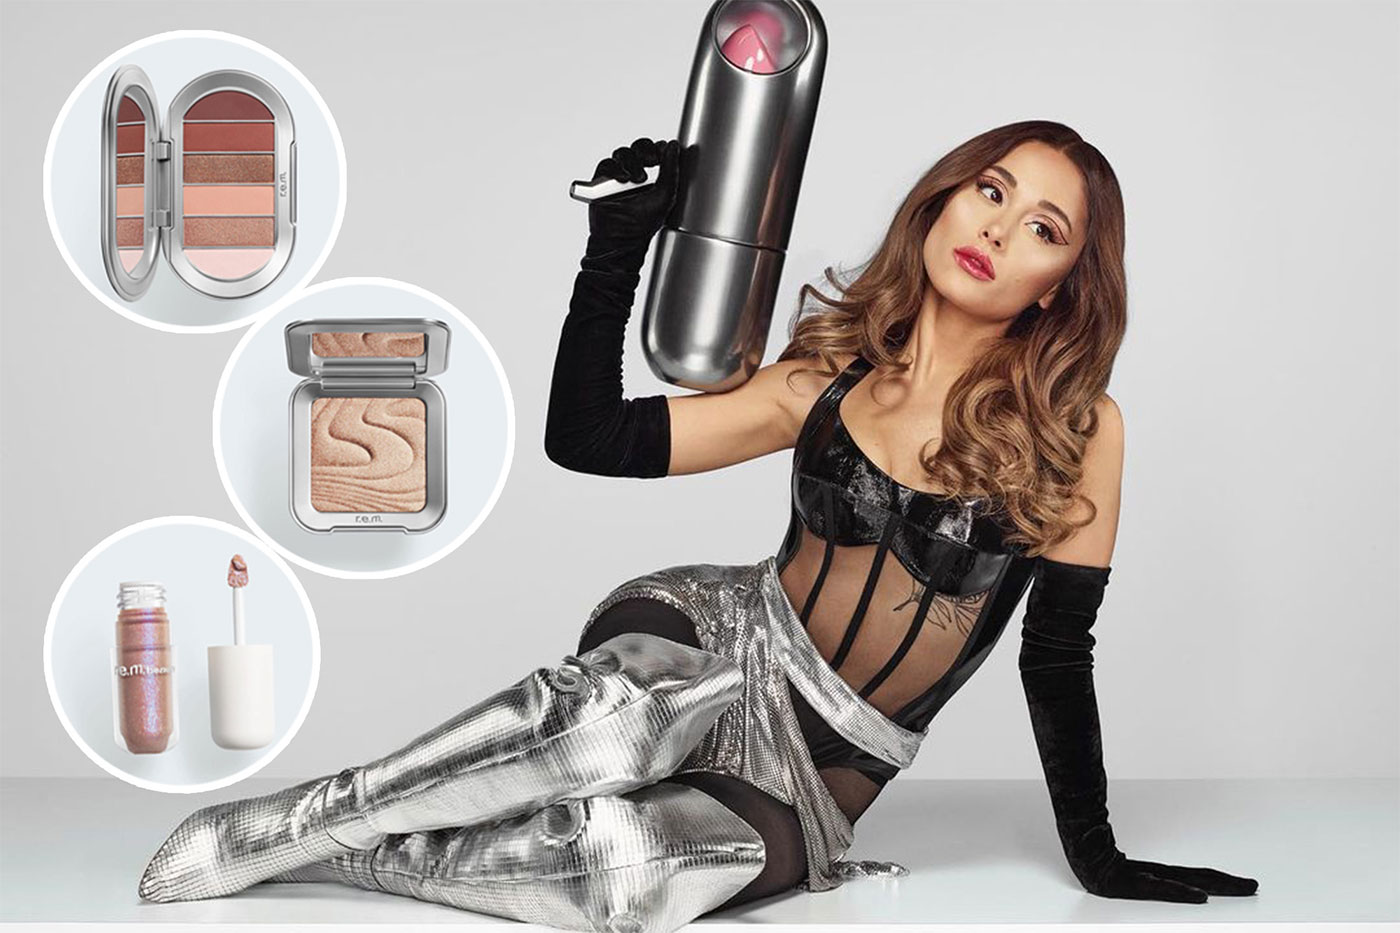 Ariana Grande’s beauty line is now available online